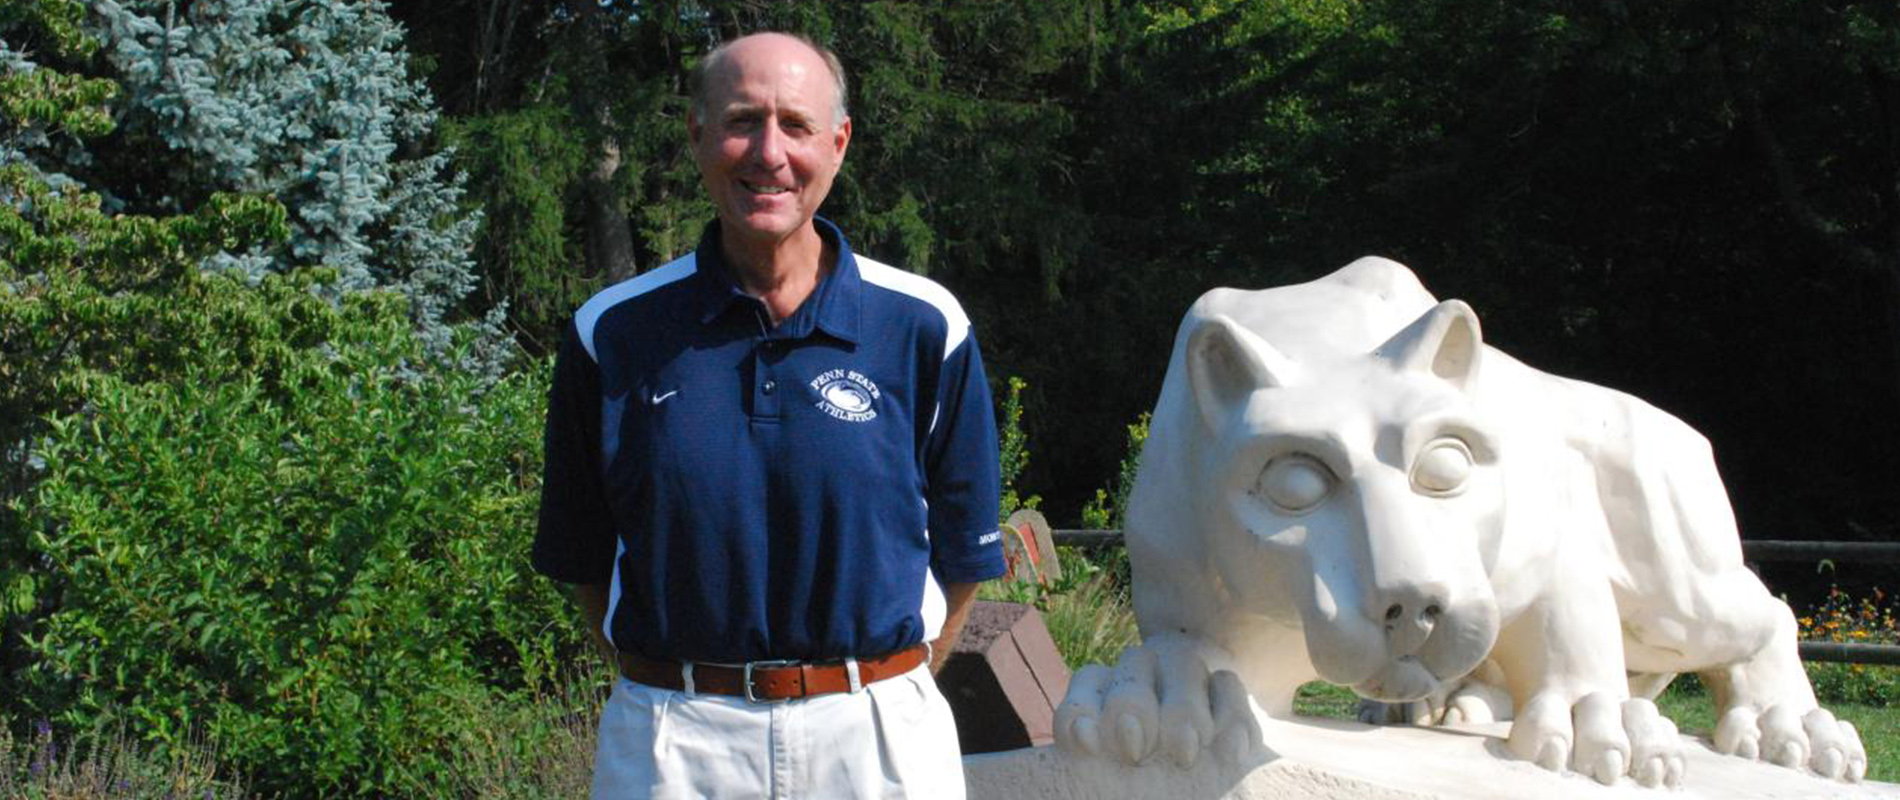 Former Penn State Mont Alto AD Marty Ogle passed away last Friday. Ogle served as the AD for 28 years.